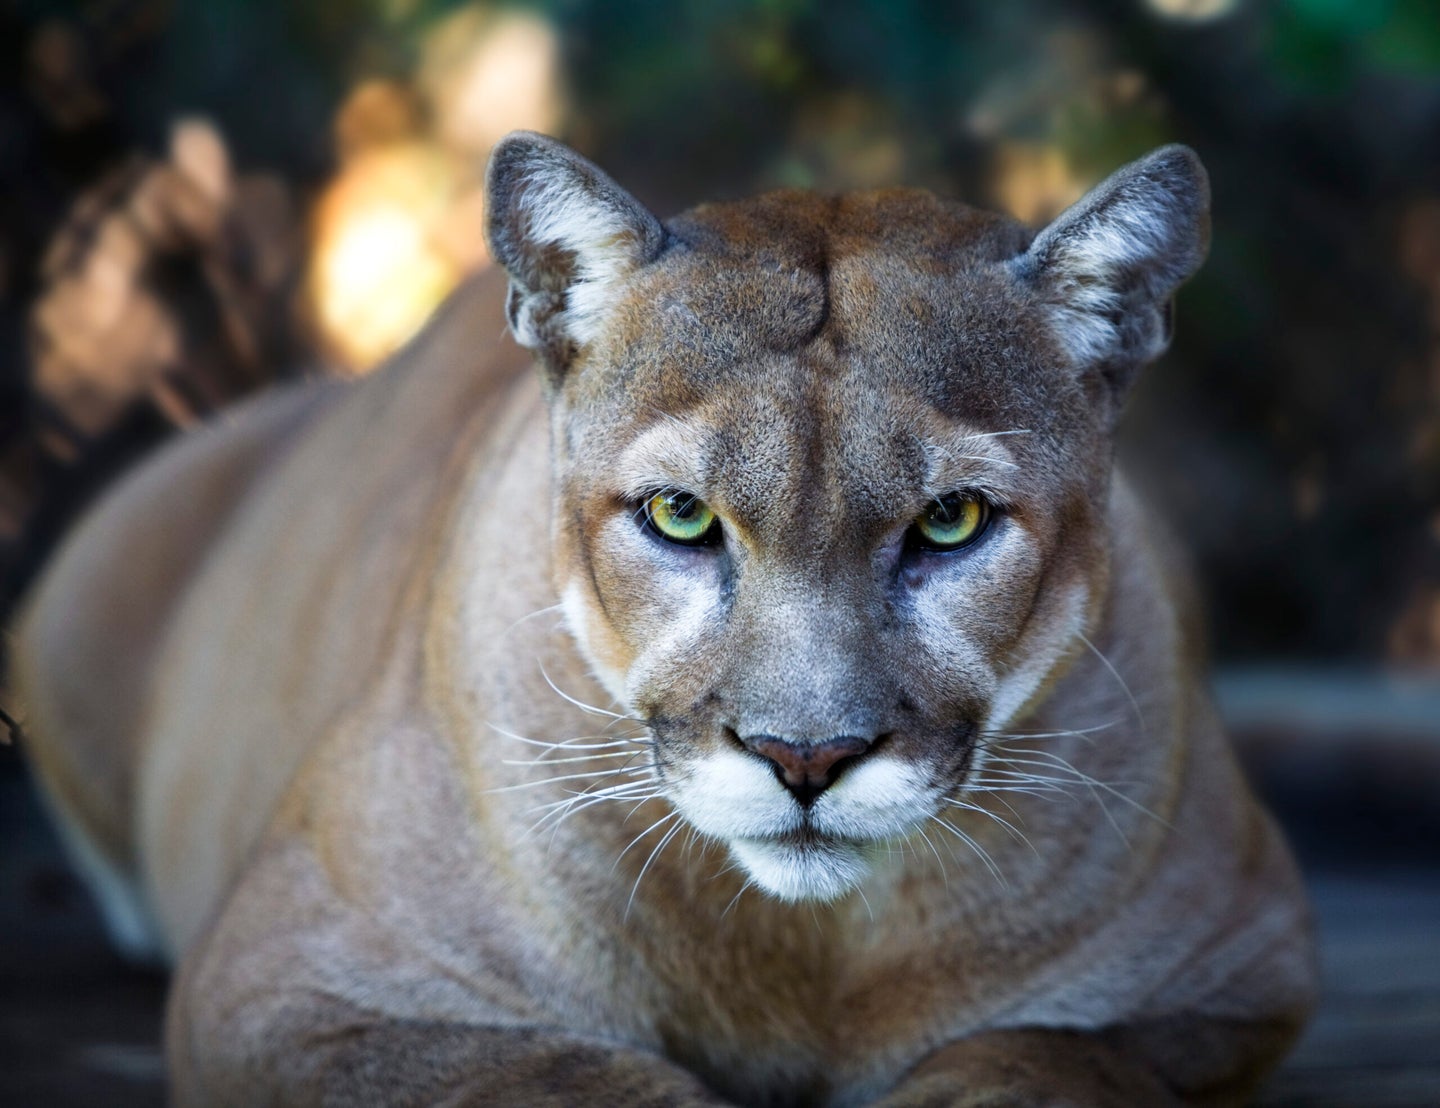 Mountain Lion Stares Intensely at Camera Close Up